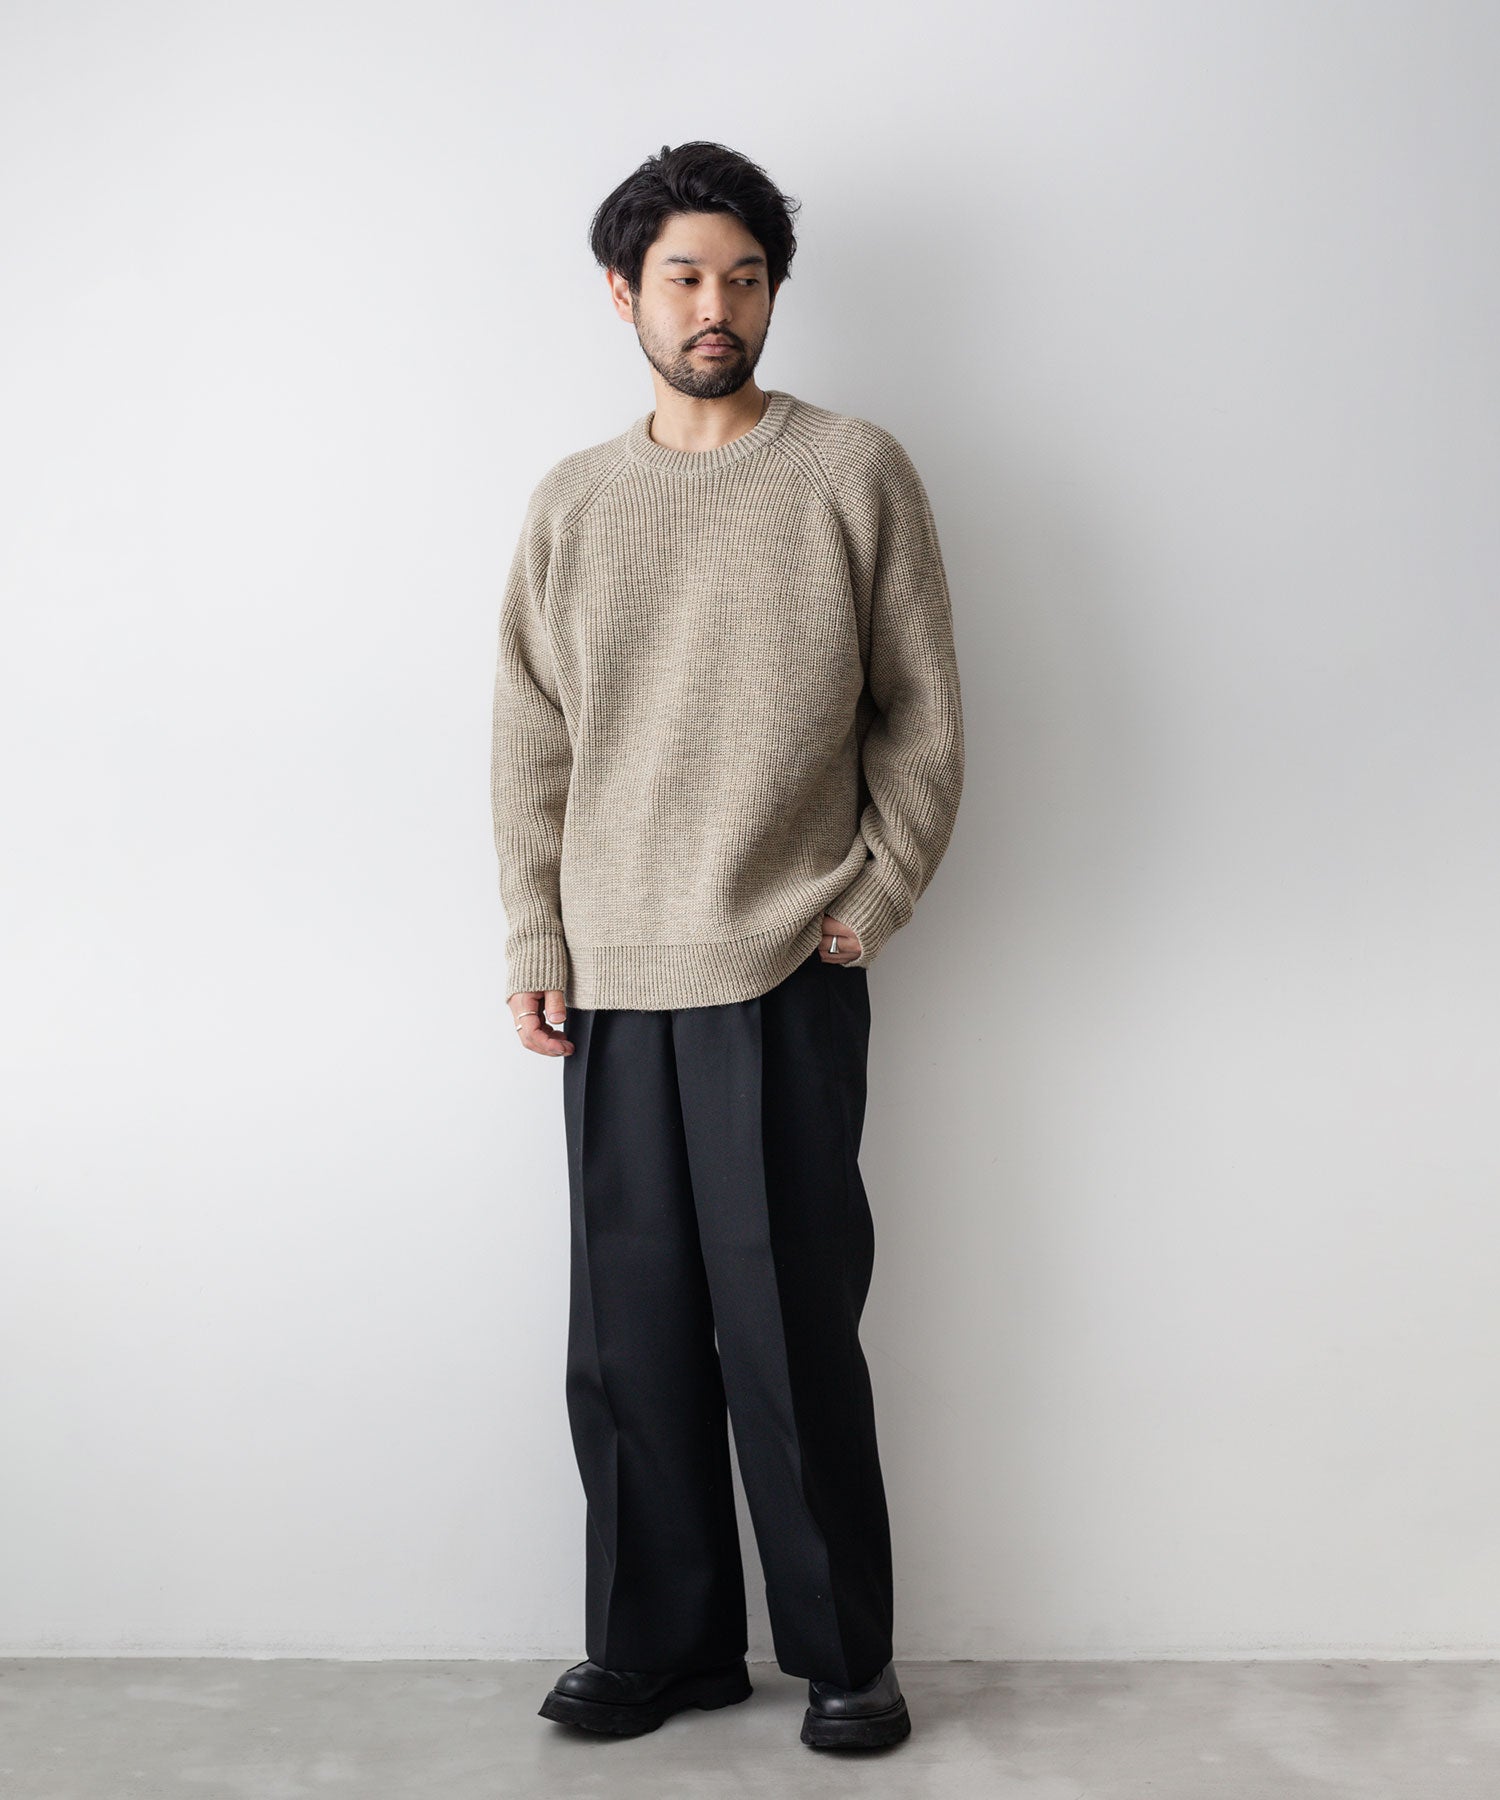 【INTÉRIM】NATURAL WOOL HEAVY FISHERMAN - NATURAL BEIGE 22aw 公式通販サイト session福岡セレクトショップ 